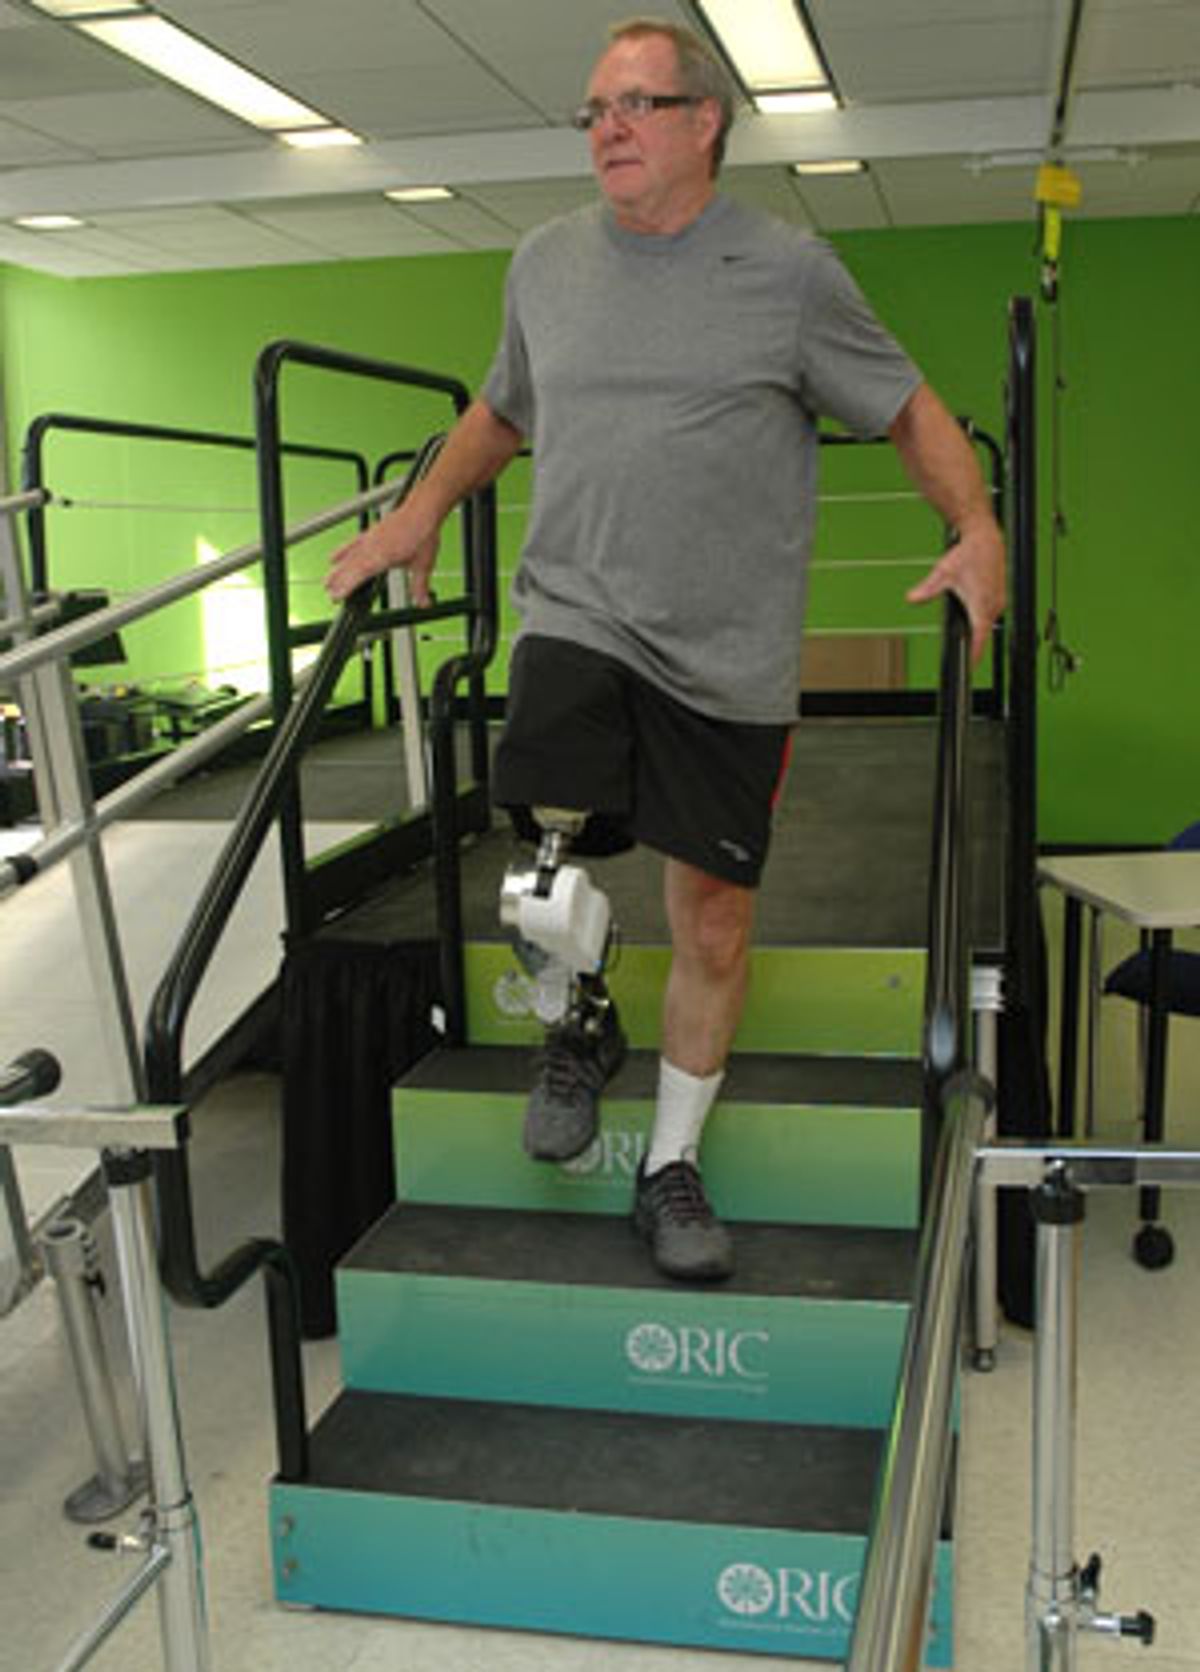 Powered Prosthetic Legs Work Better by Tracking EMG